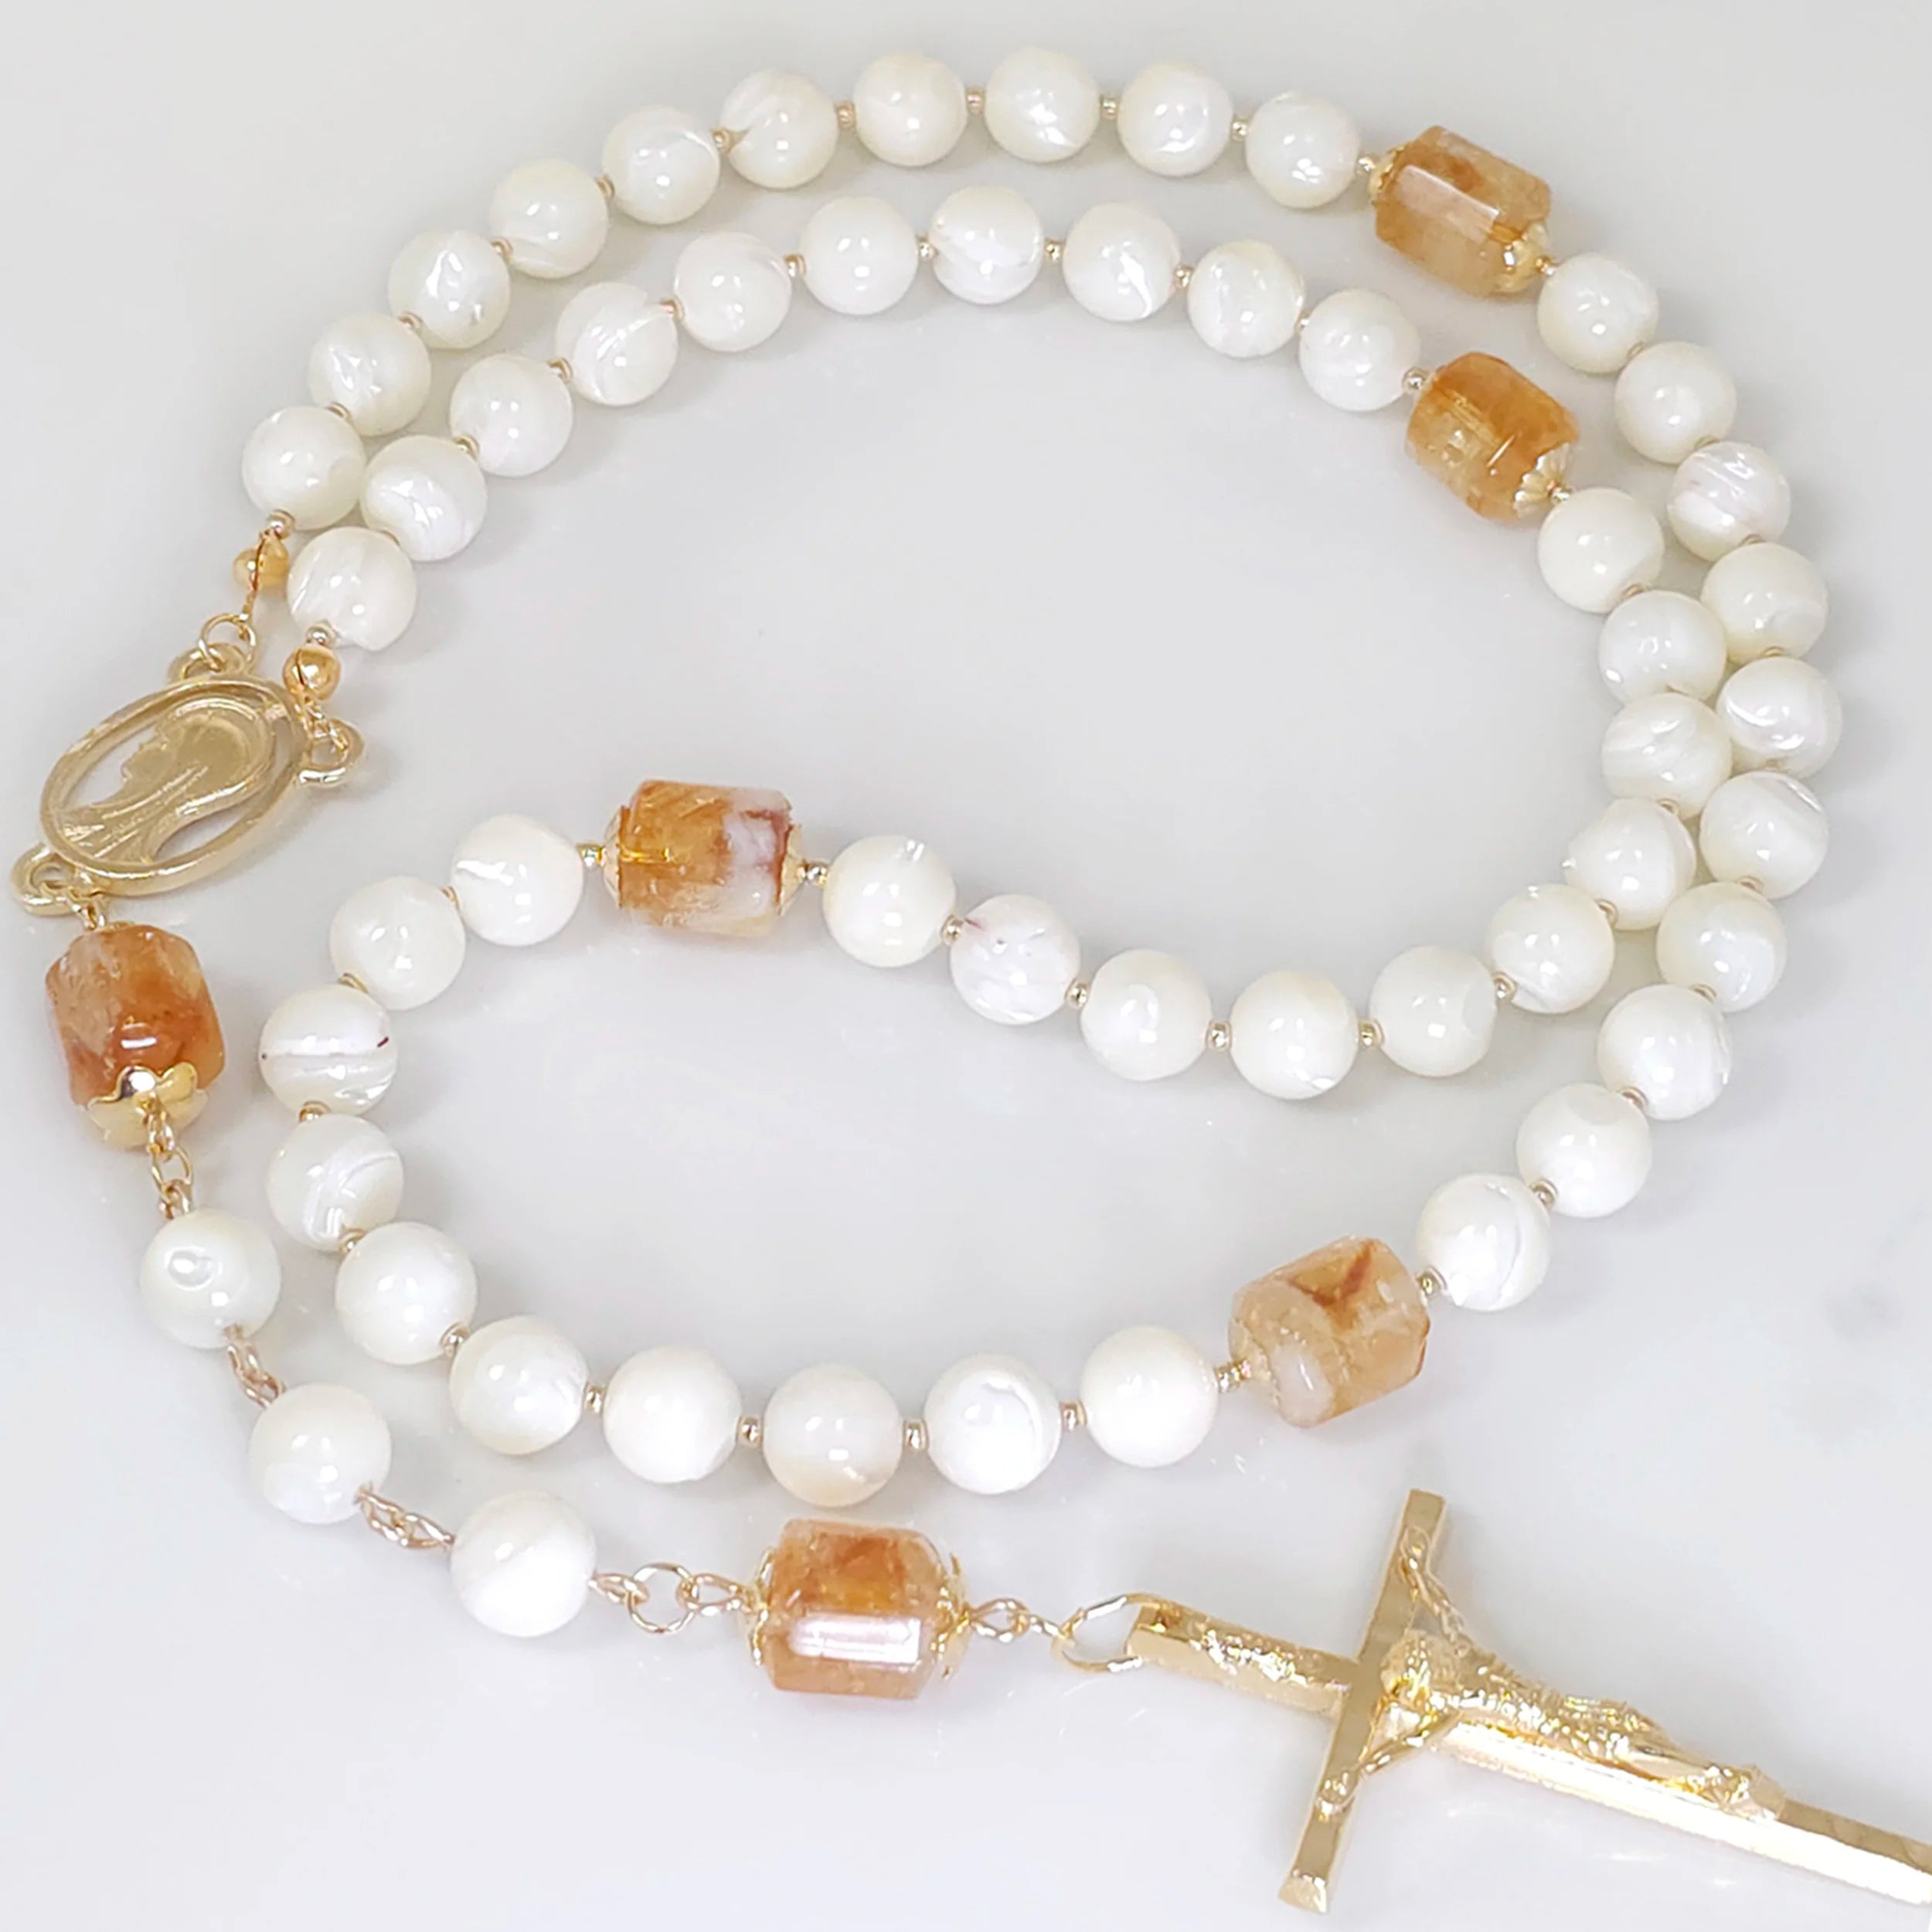 Elegant Mother of Pearl rosary with golden Citrine beads and a Gold-plated Crucifix, displayed on a white table.